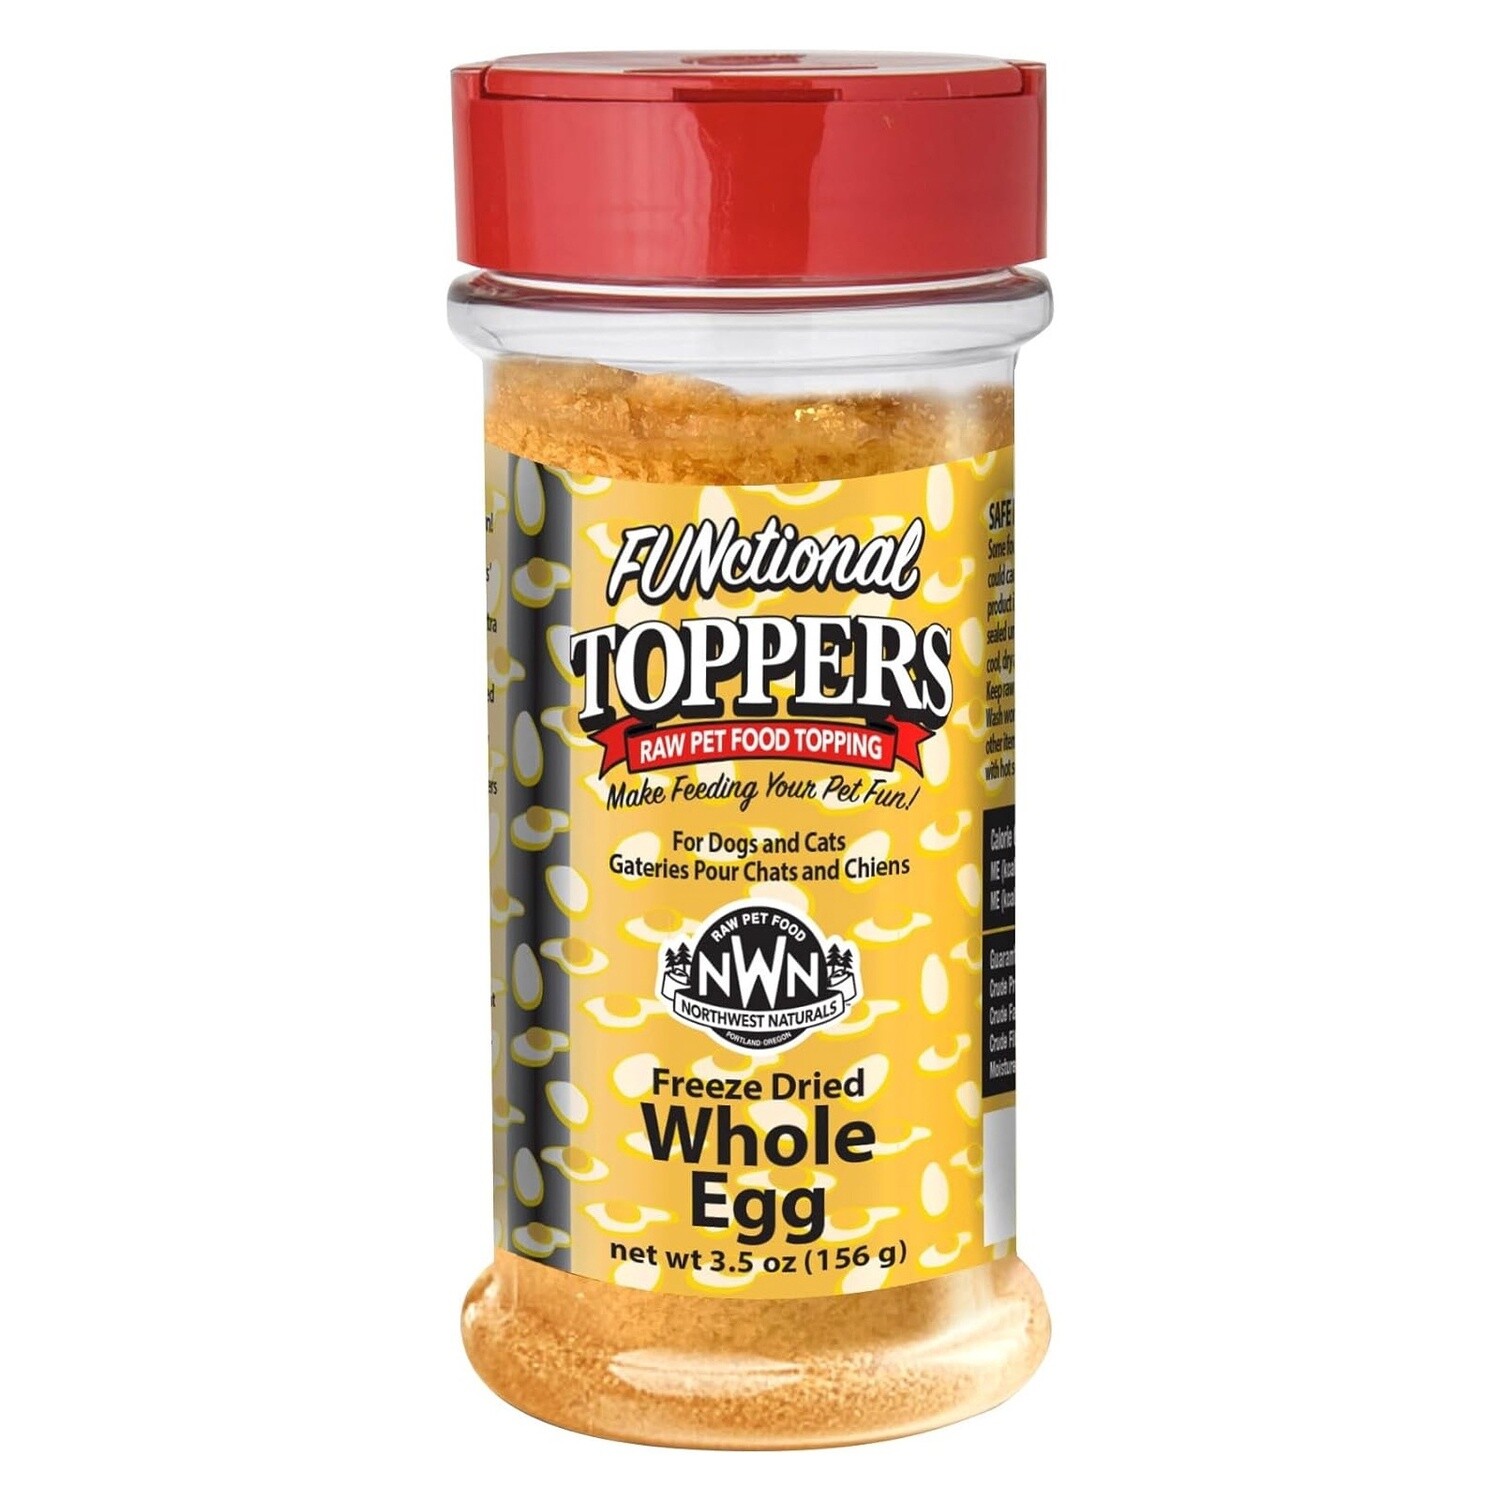 FUNctional Toppers Freeze Dried Whole Egg 4oz